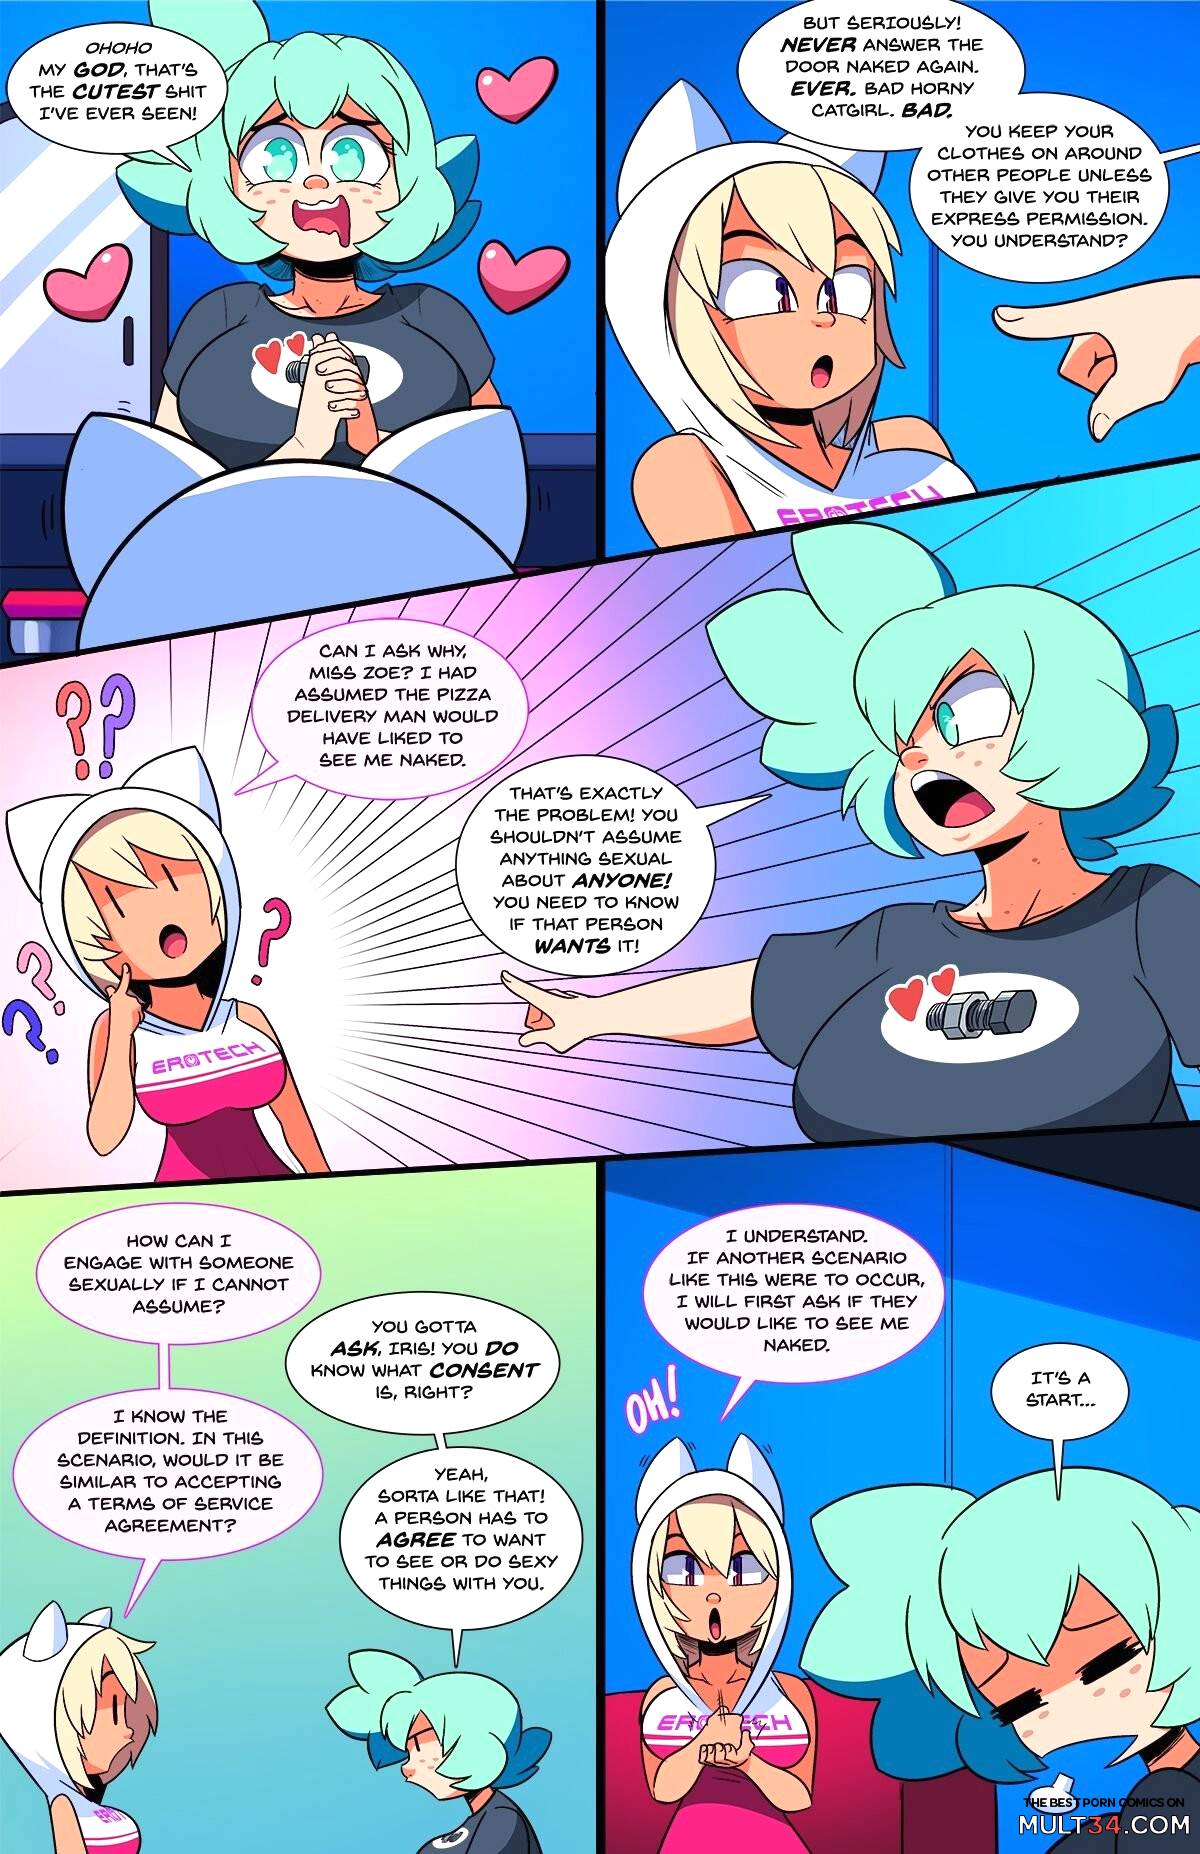 Erotech - Chapter 2 page 19